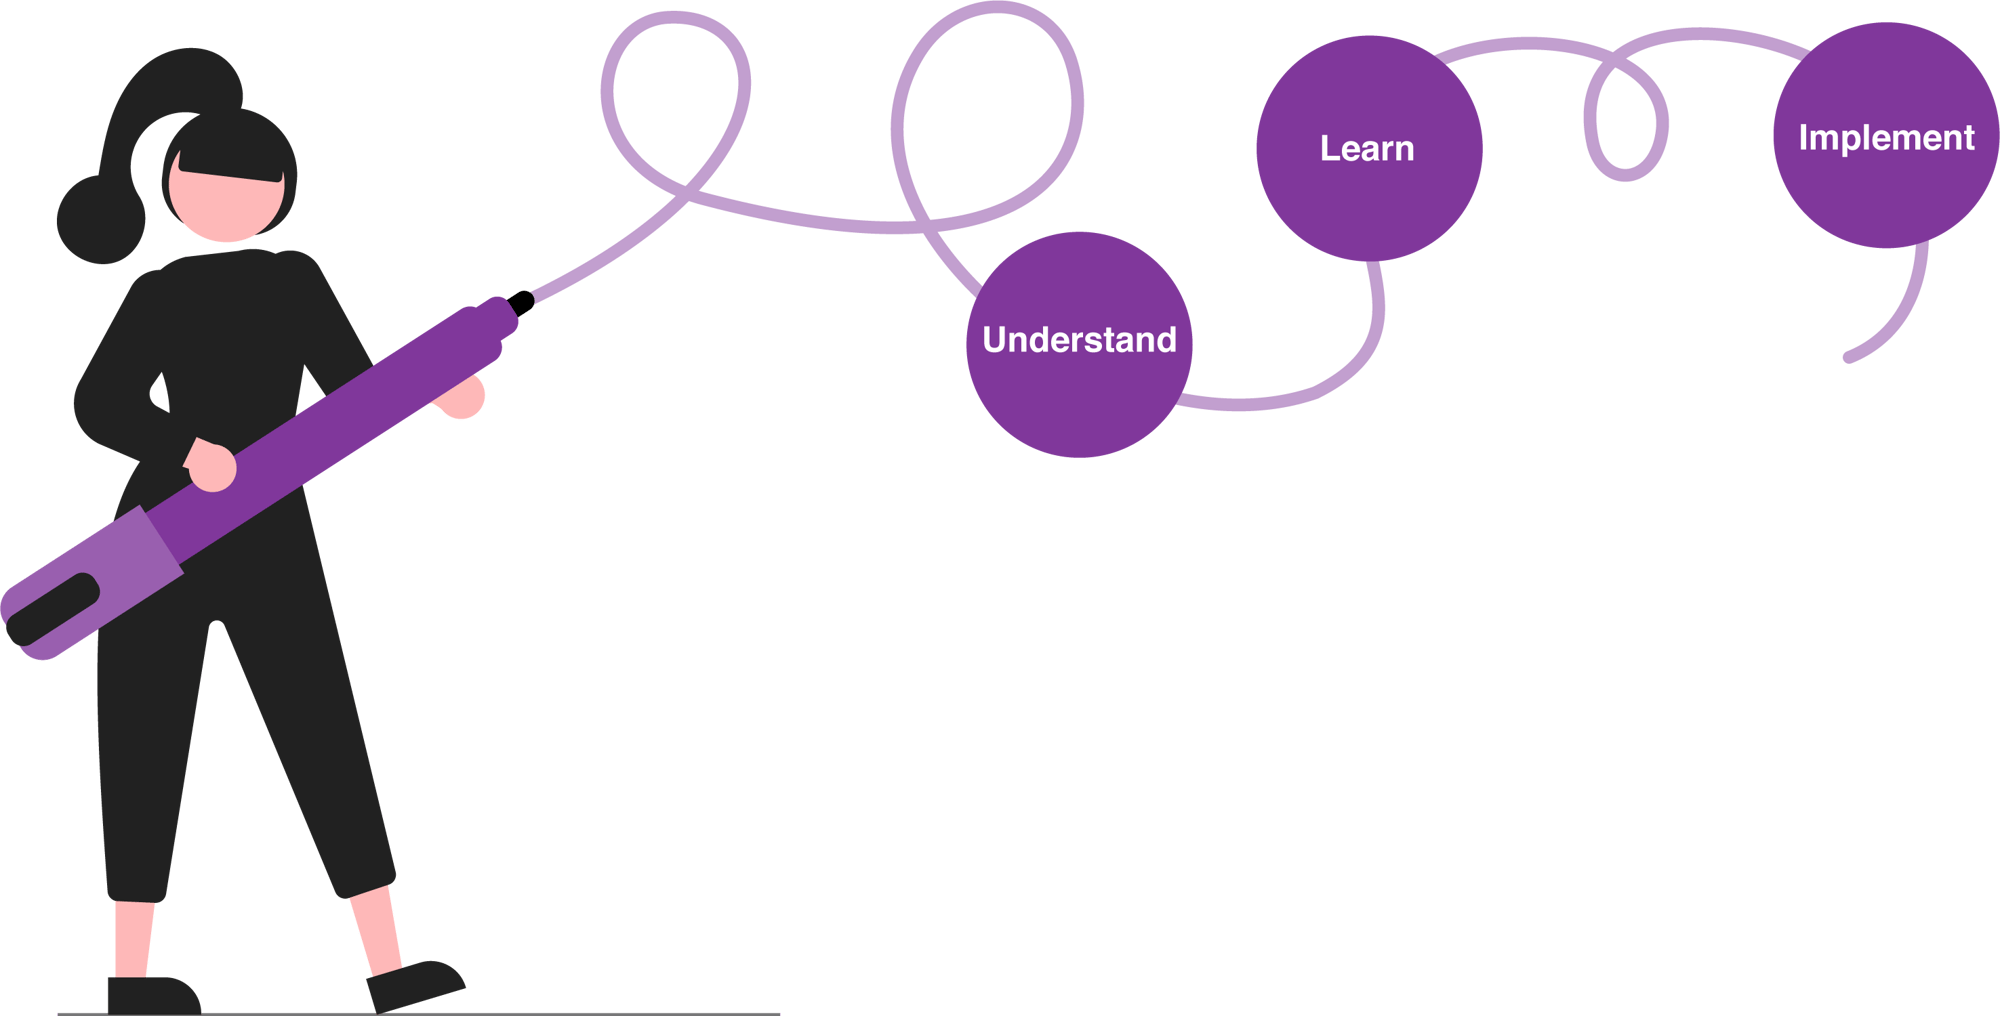 Understand - Learn - Implement